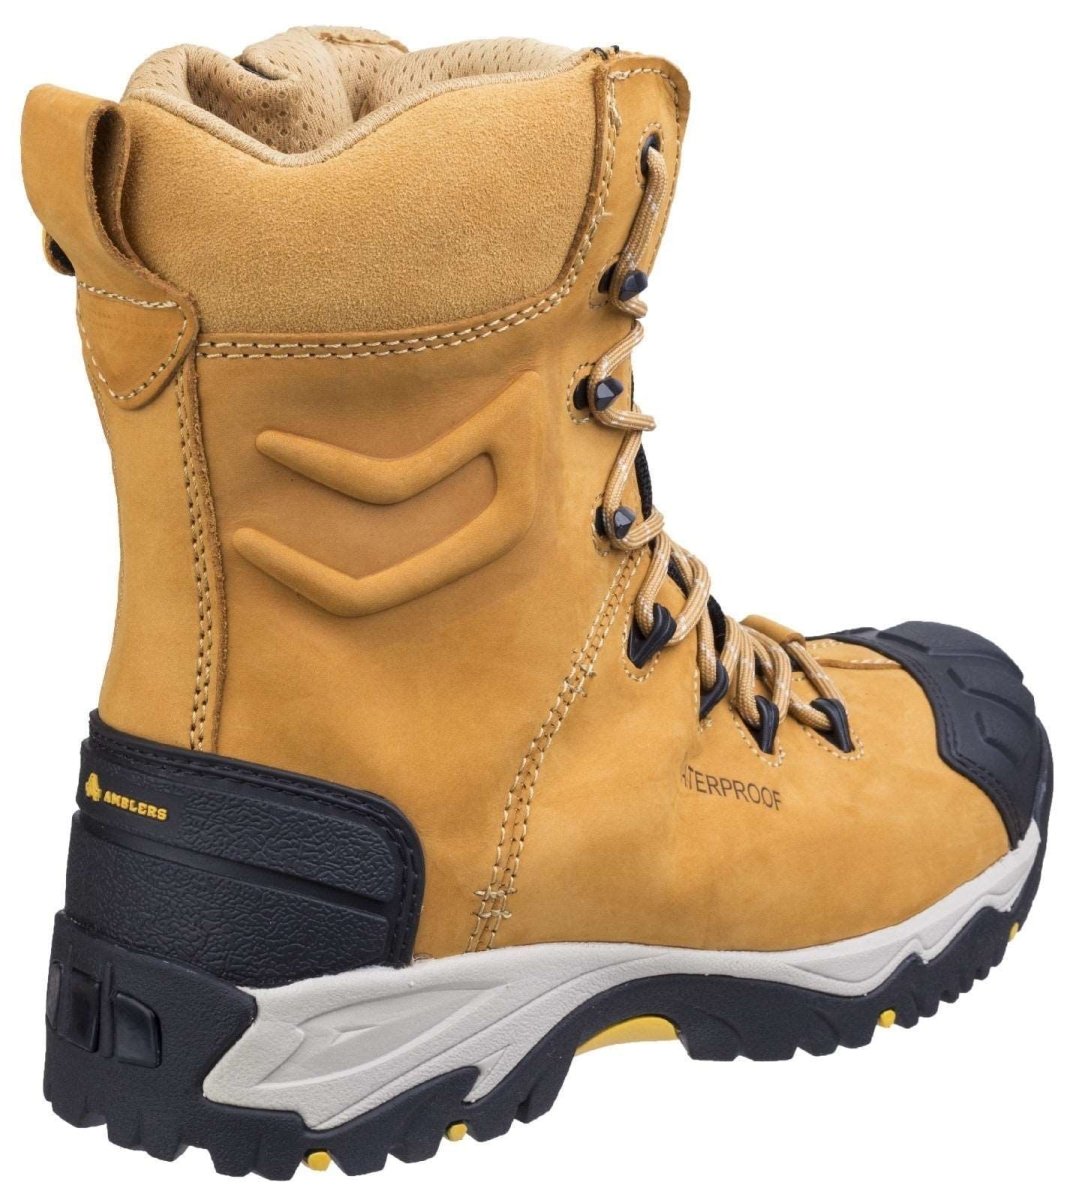 Amblers FS998 Waterproof Composite Safety Boots - Shoe Store Direct